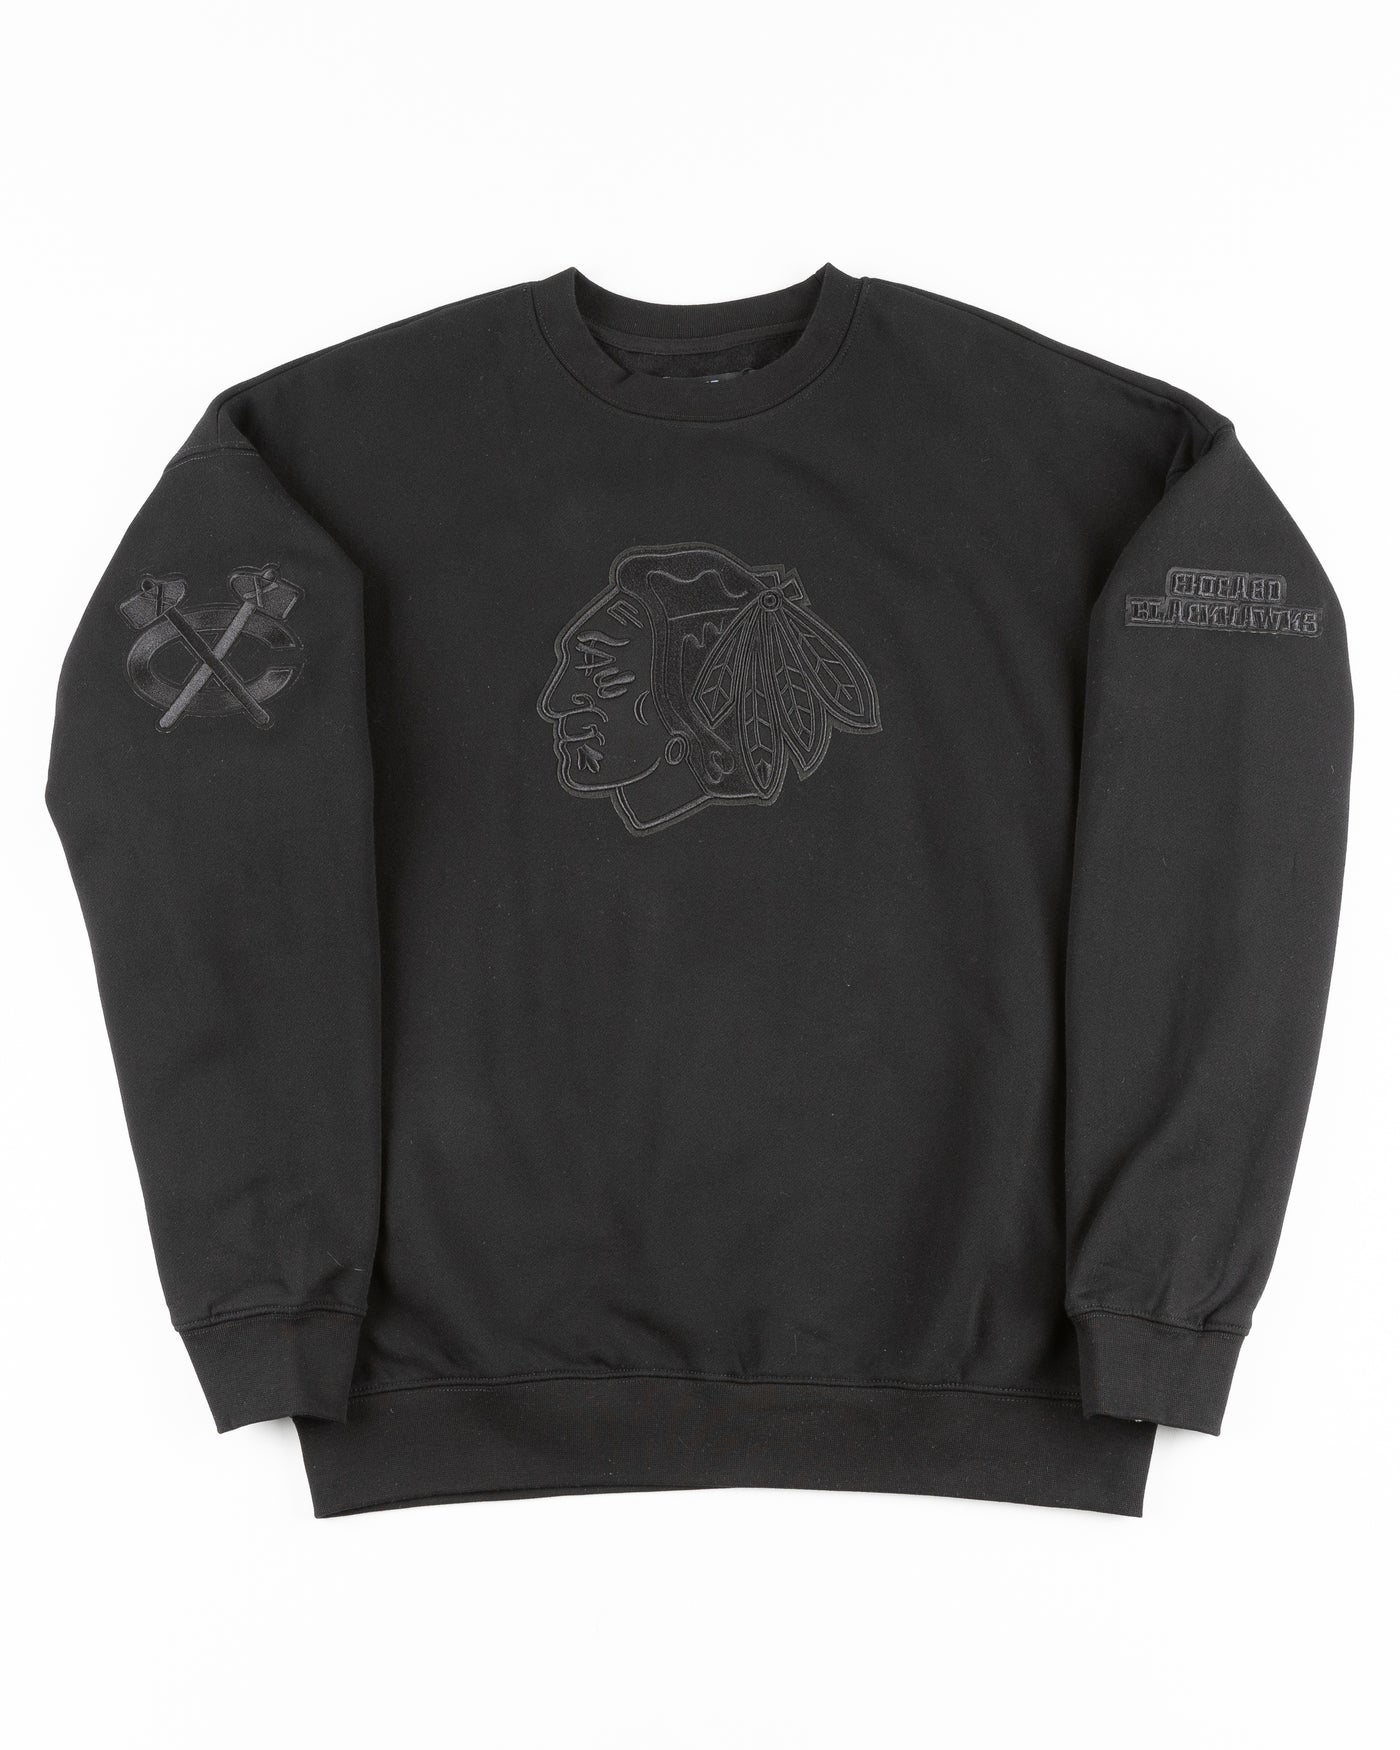 all black crewneck with tonal Chicago Blackhawks patches embroidered on front and shoulders - front lay flat